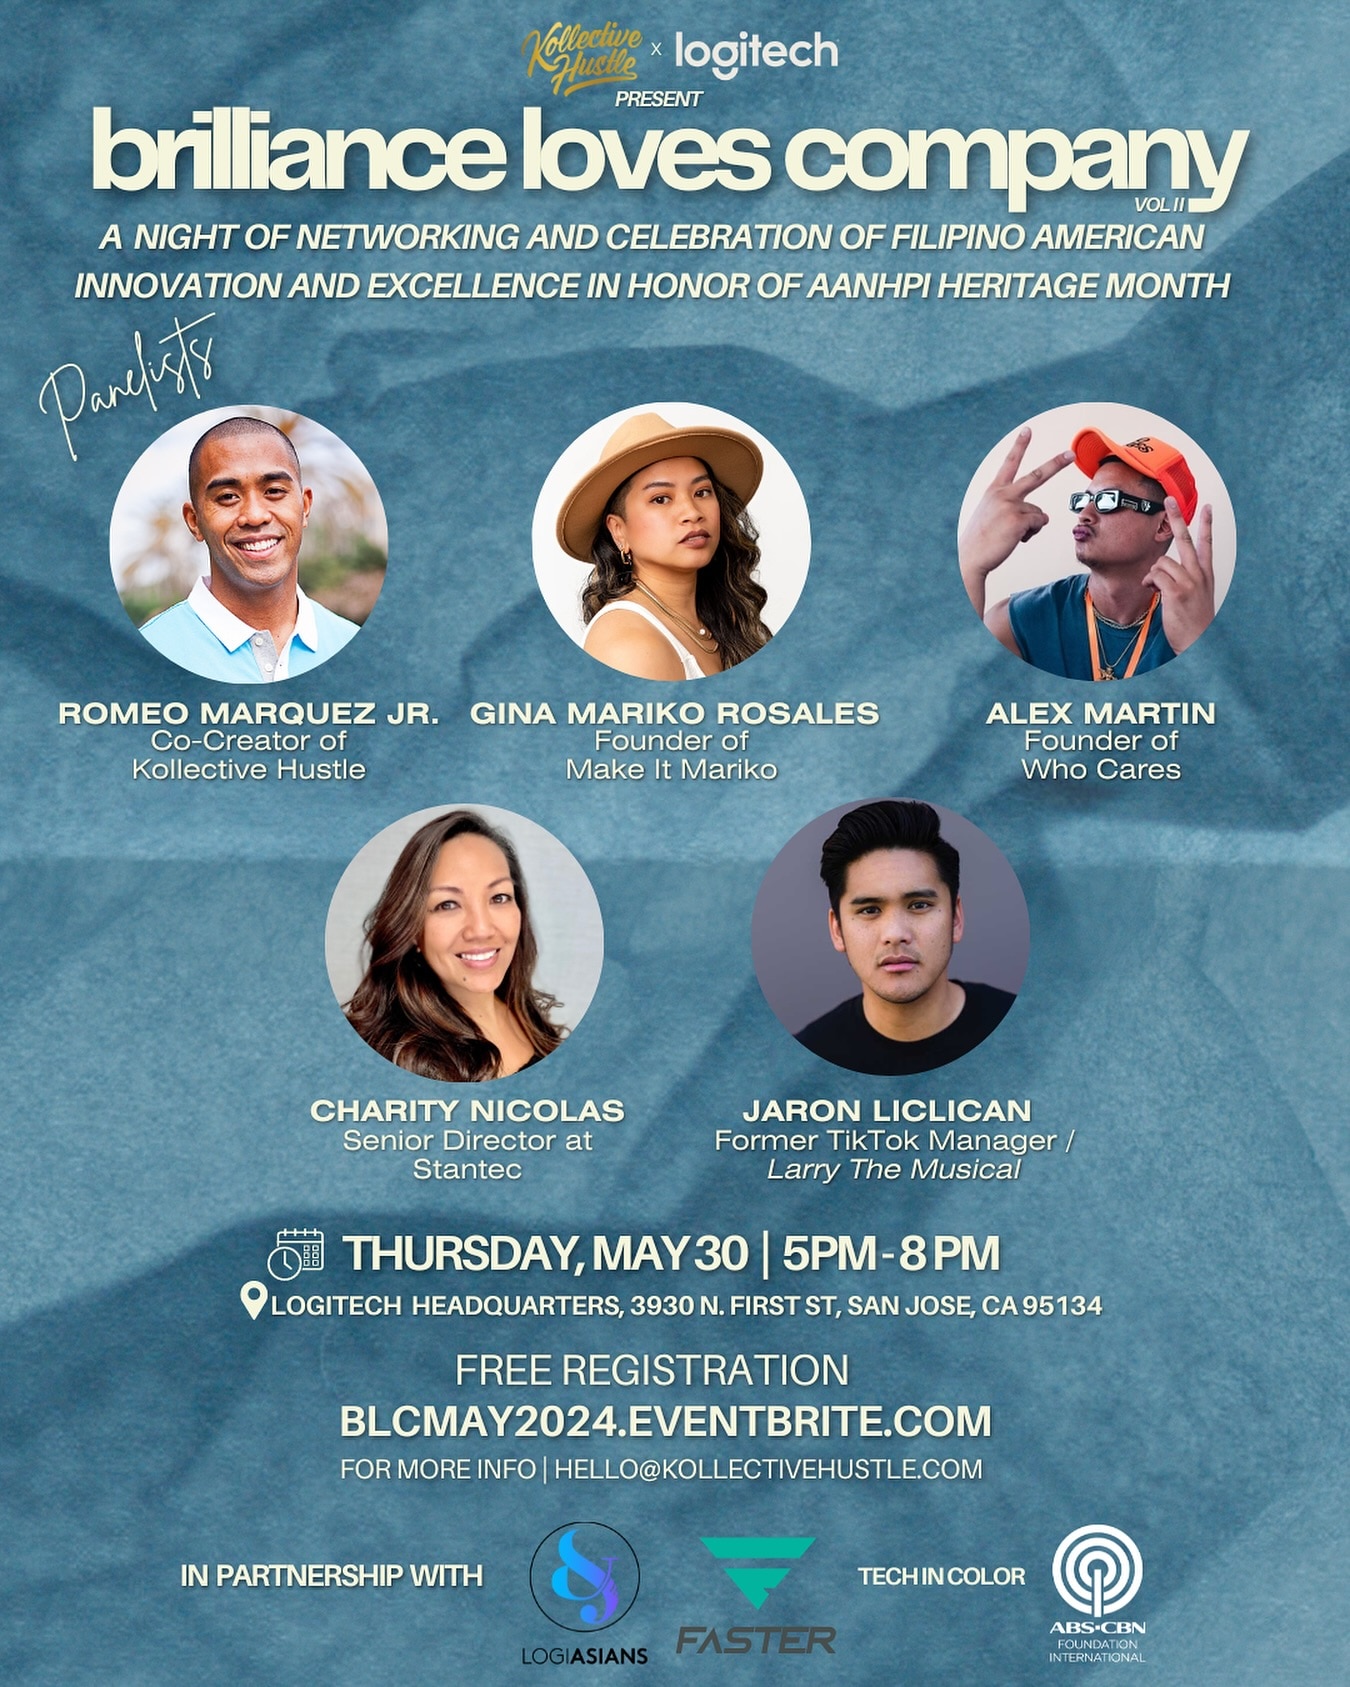 Celebrate Filipino Innovation and Excellence at the 2nd “Brilliance Loves Company” Networking Event